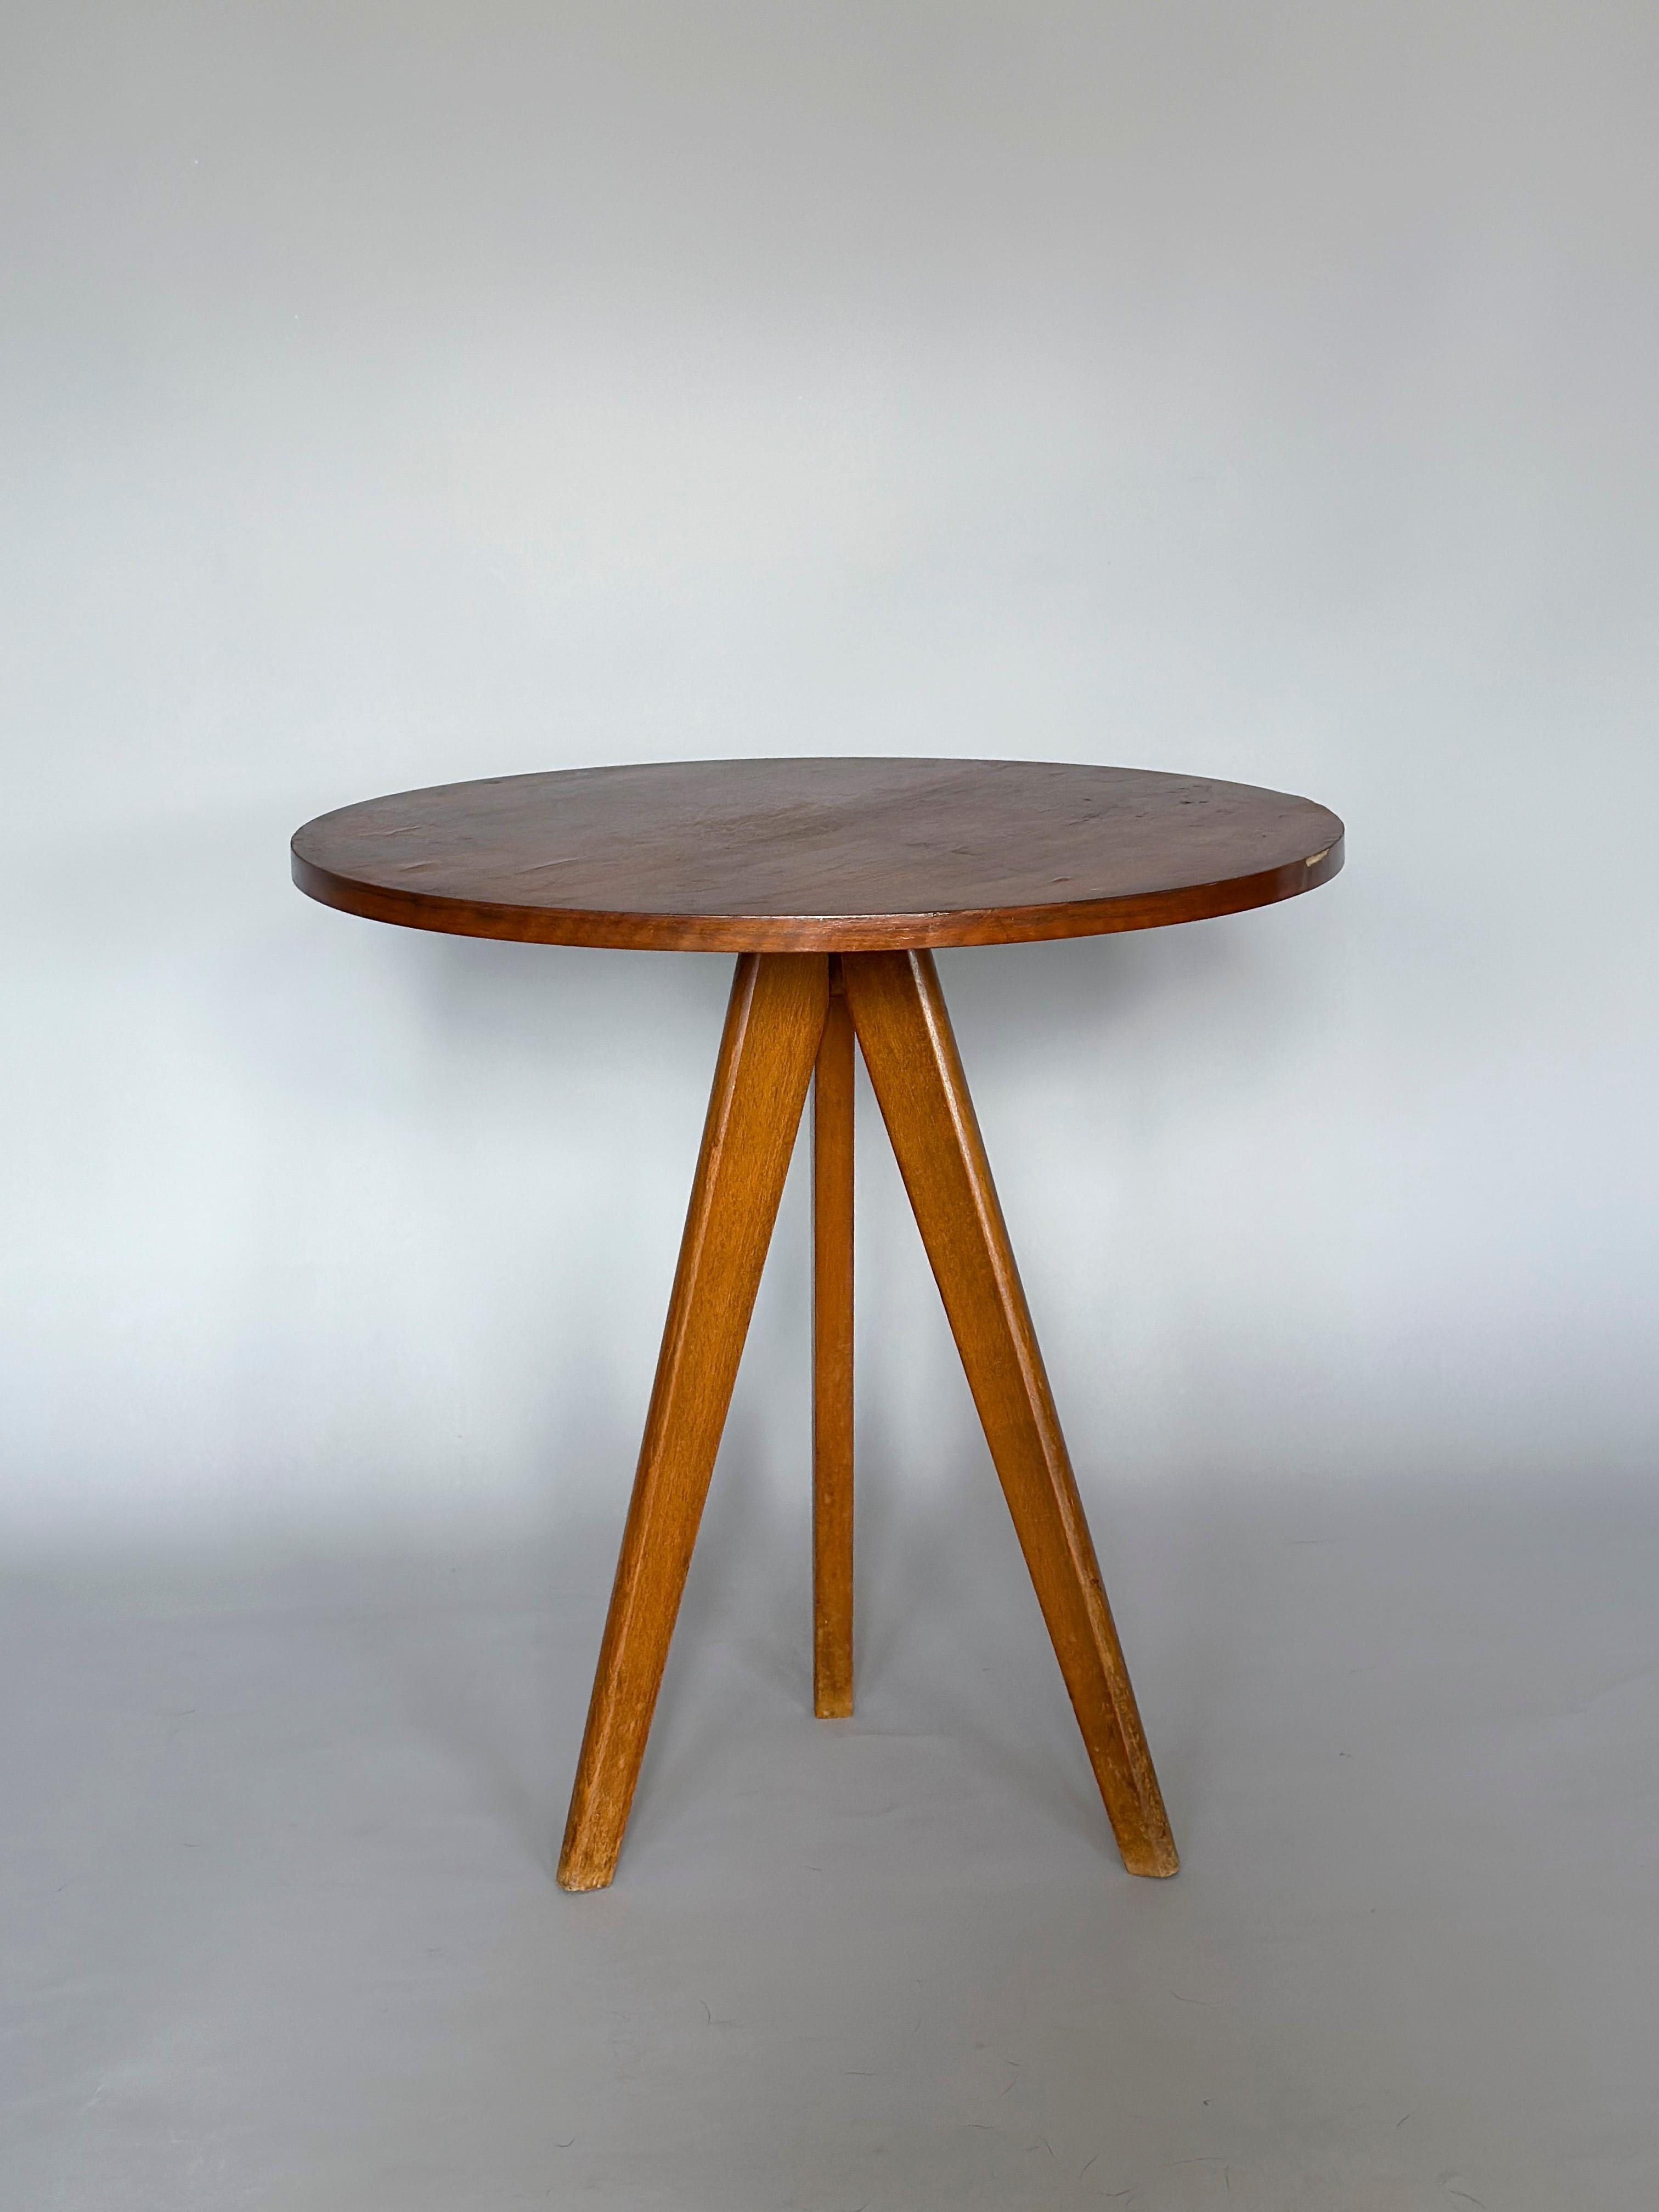 Elegant and simple Mid-Century Modern coffee table by Jean Prouve (Prouvé) from circa 1950.


